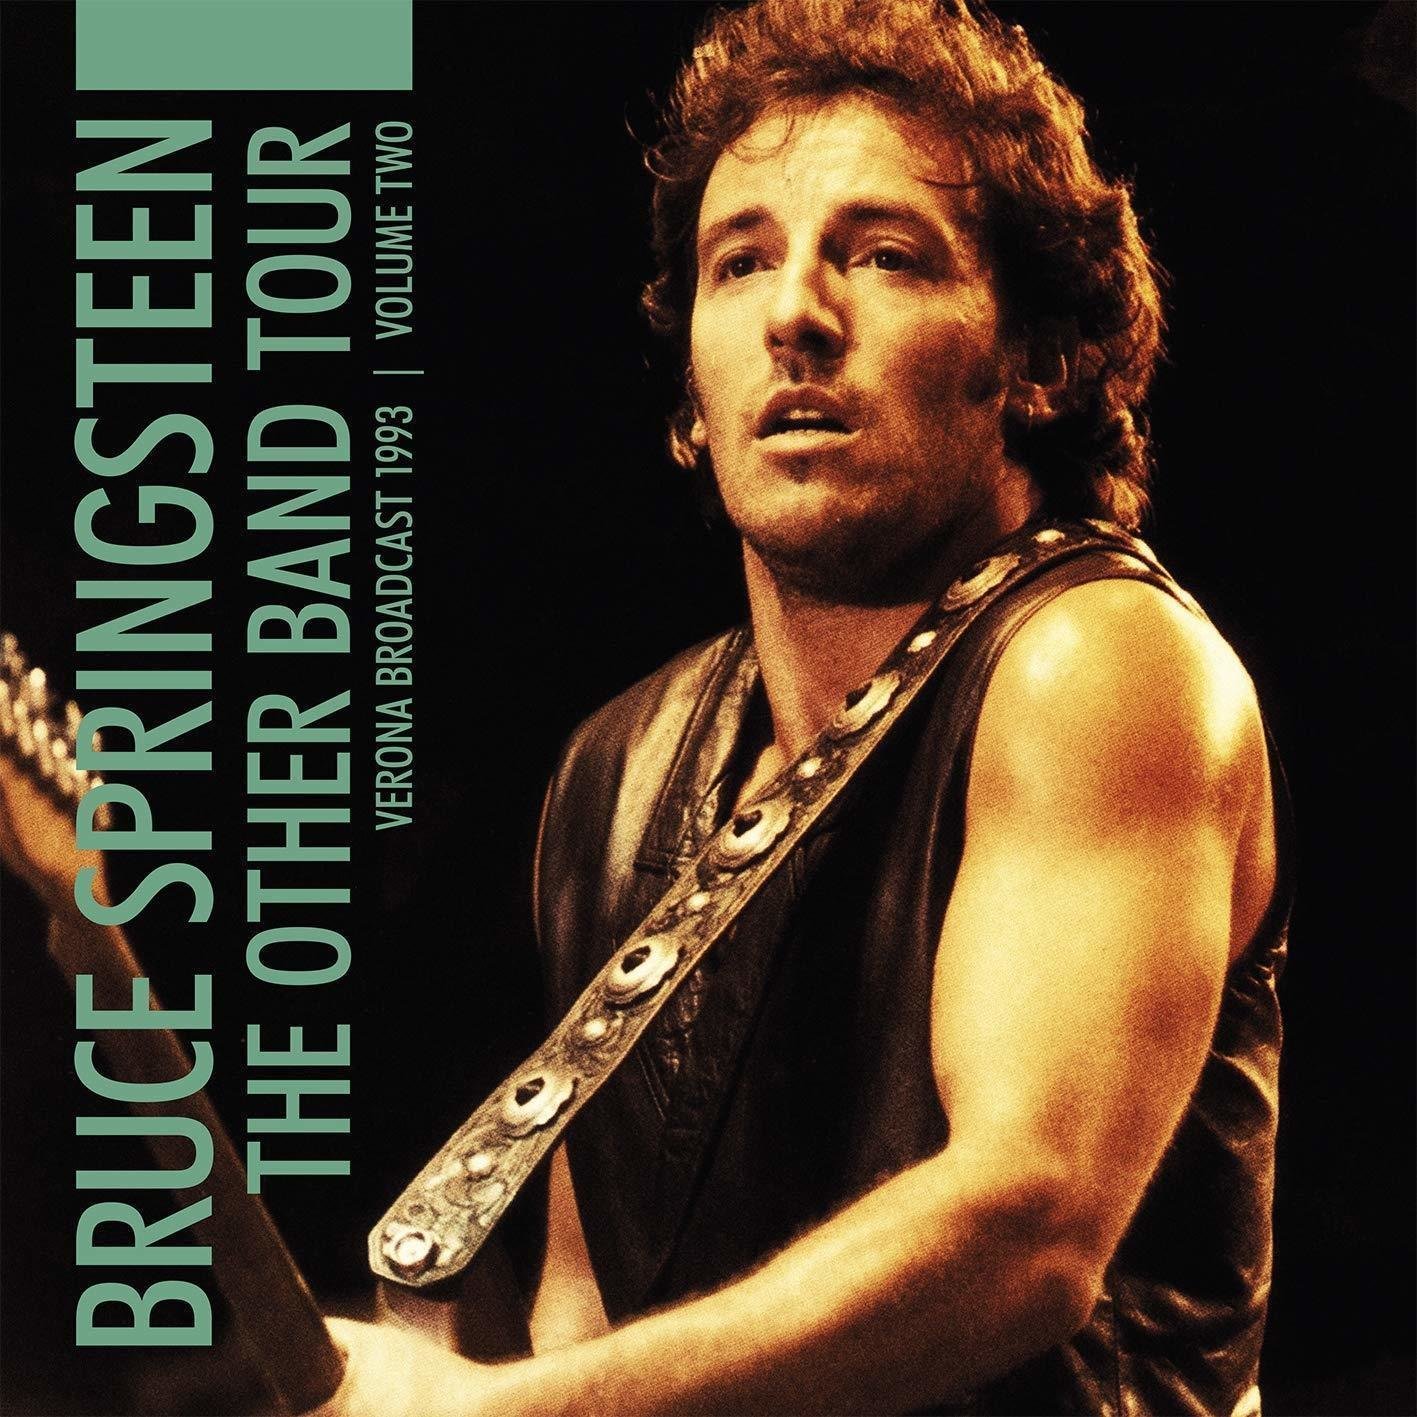 Disque vinyle Bruce Springsteen - The Other Band Tour - Verona Broadcast 1993 - Volume Two (2 LP)